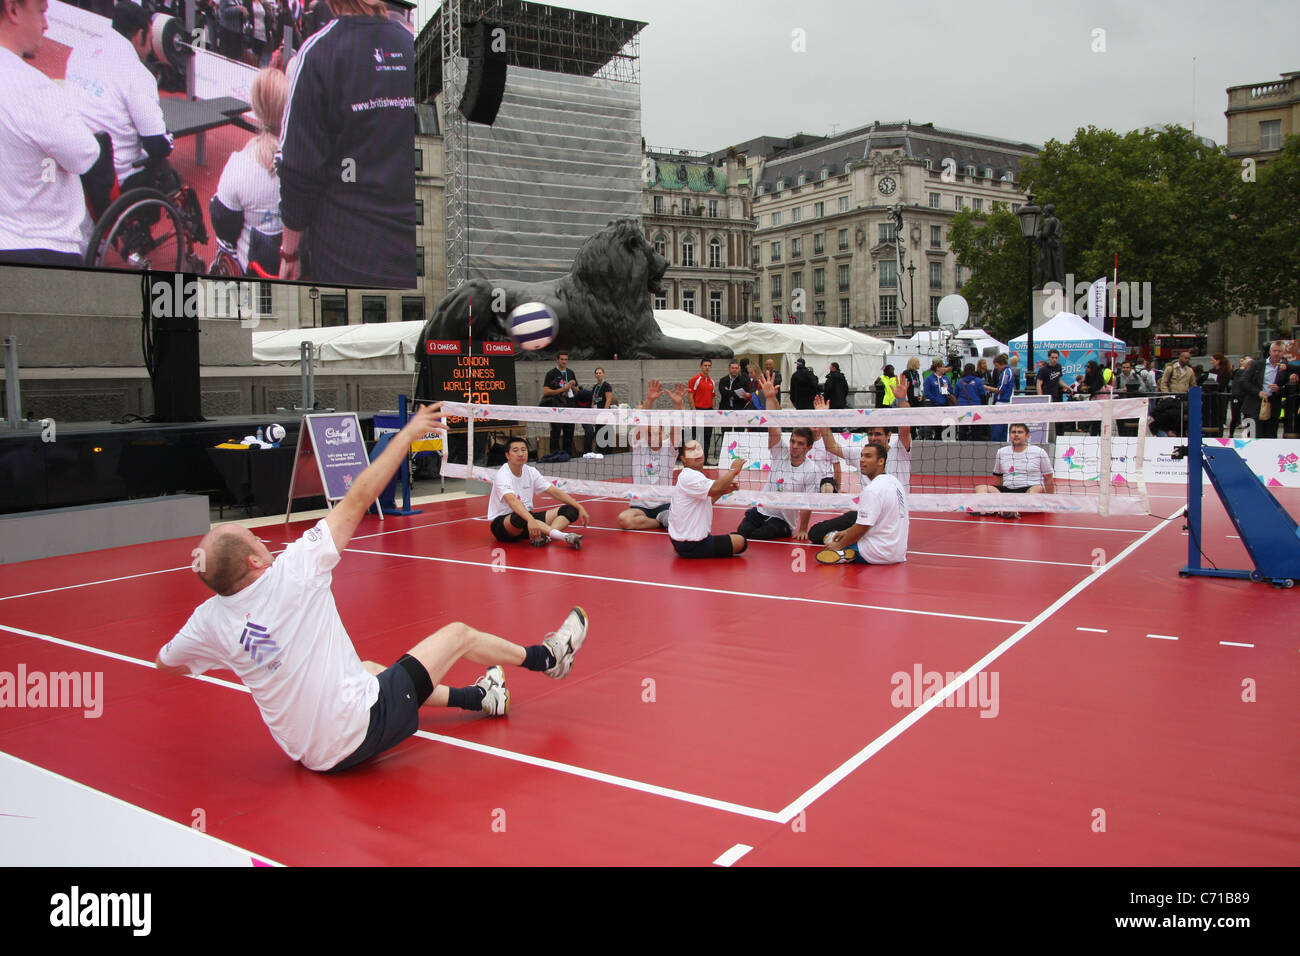 Sit down volleyball. International Paralympic Day in Trafalgar Square to promote the London 2012 Paralympic games. Stock Photo